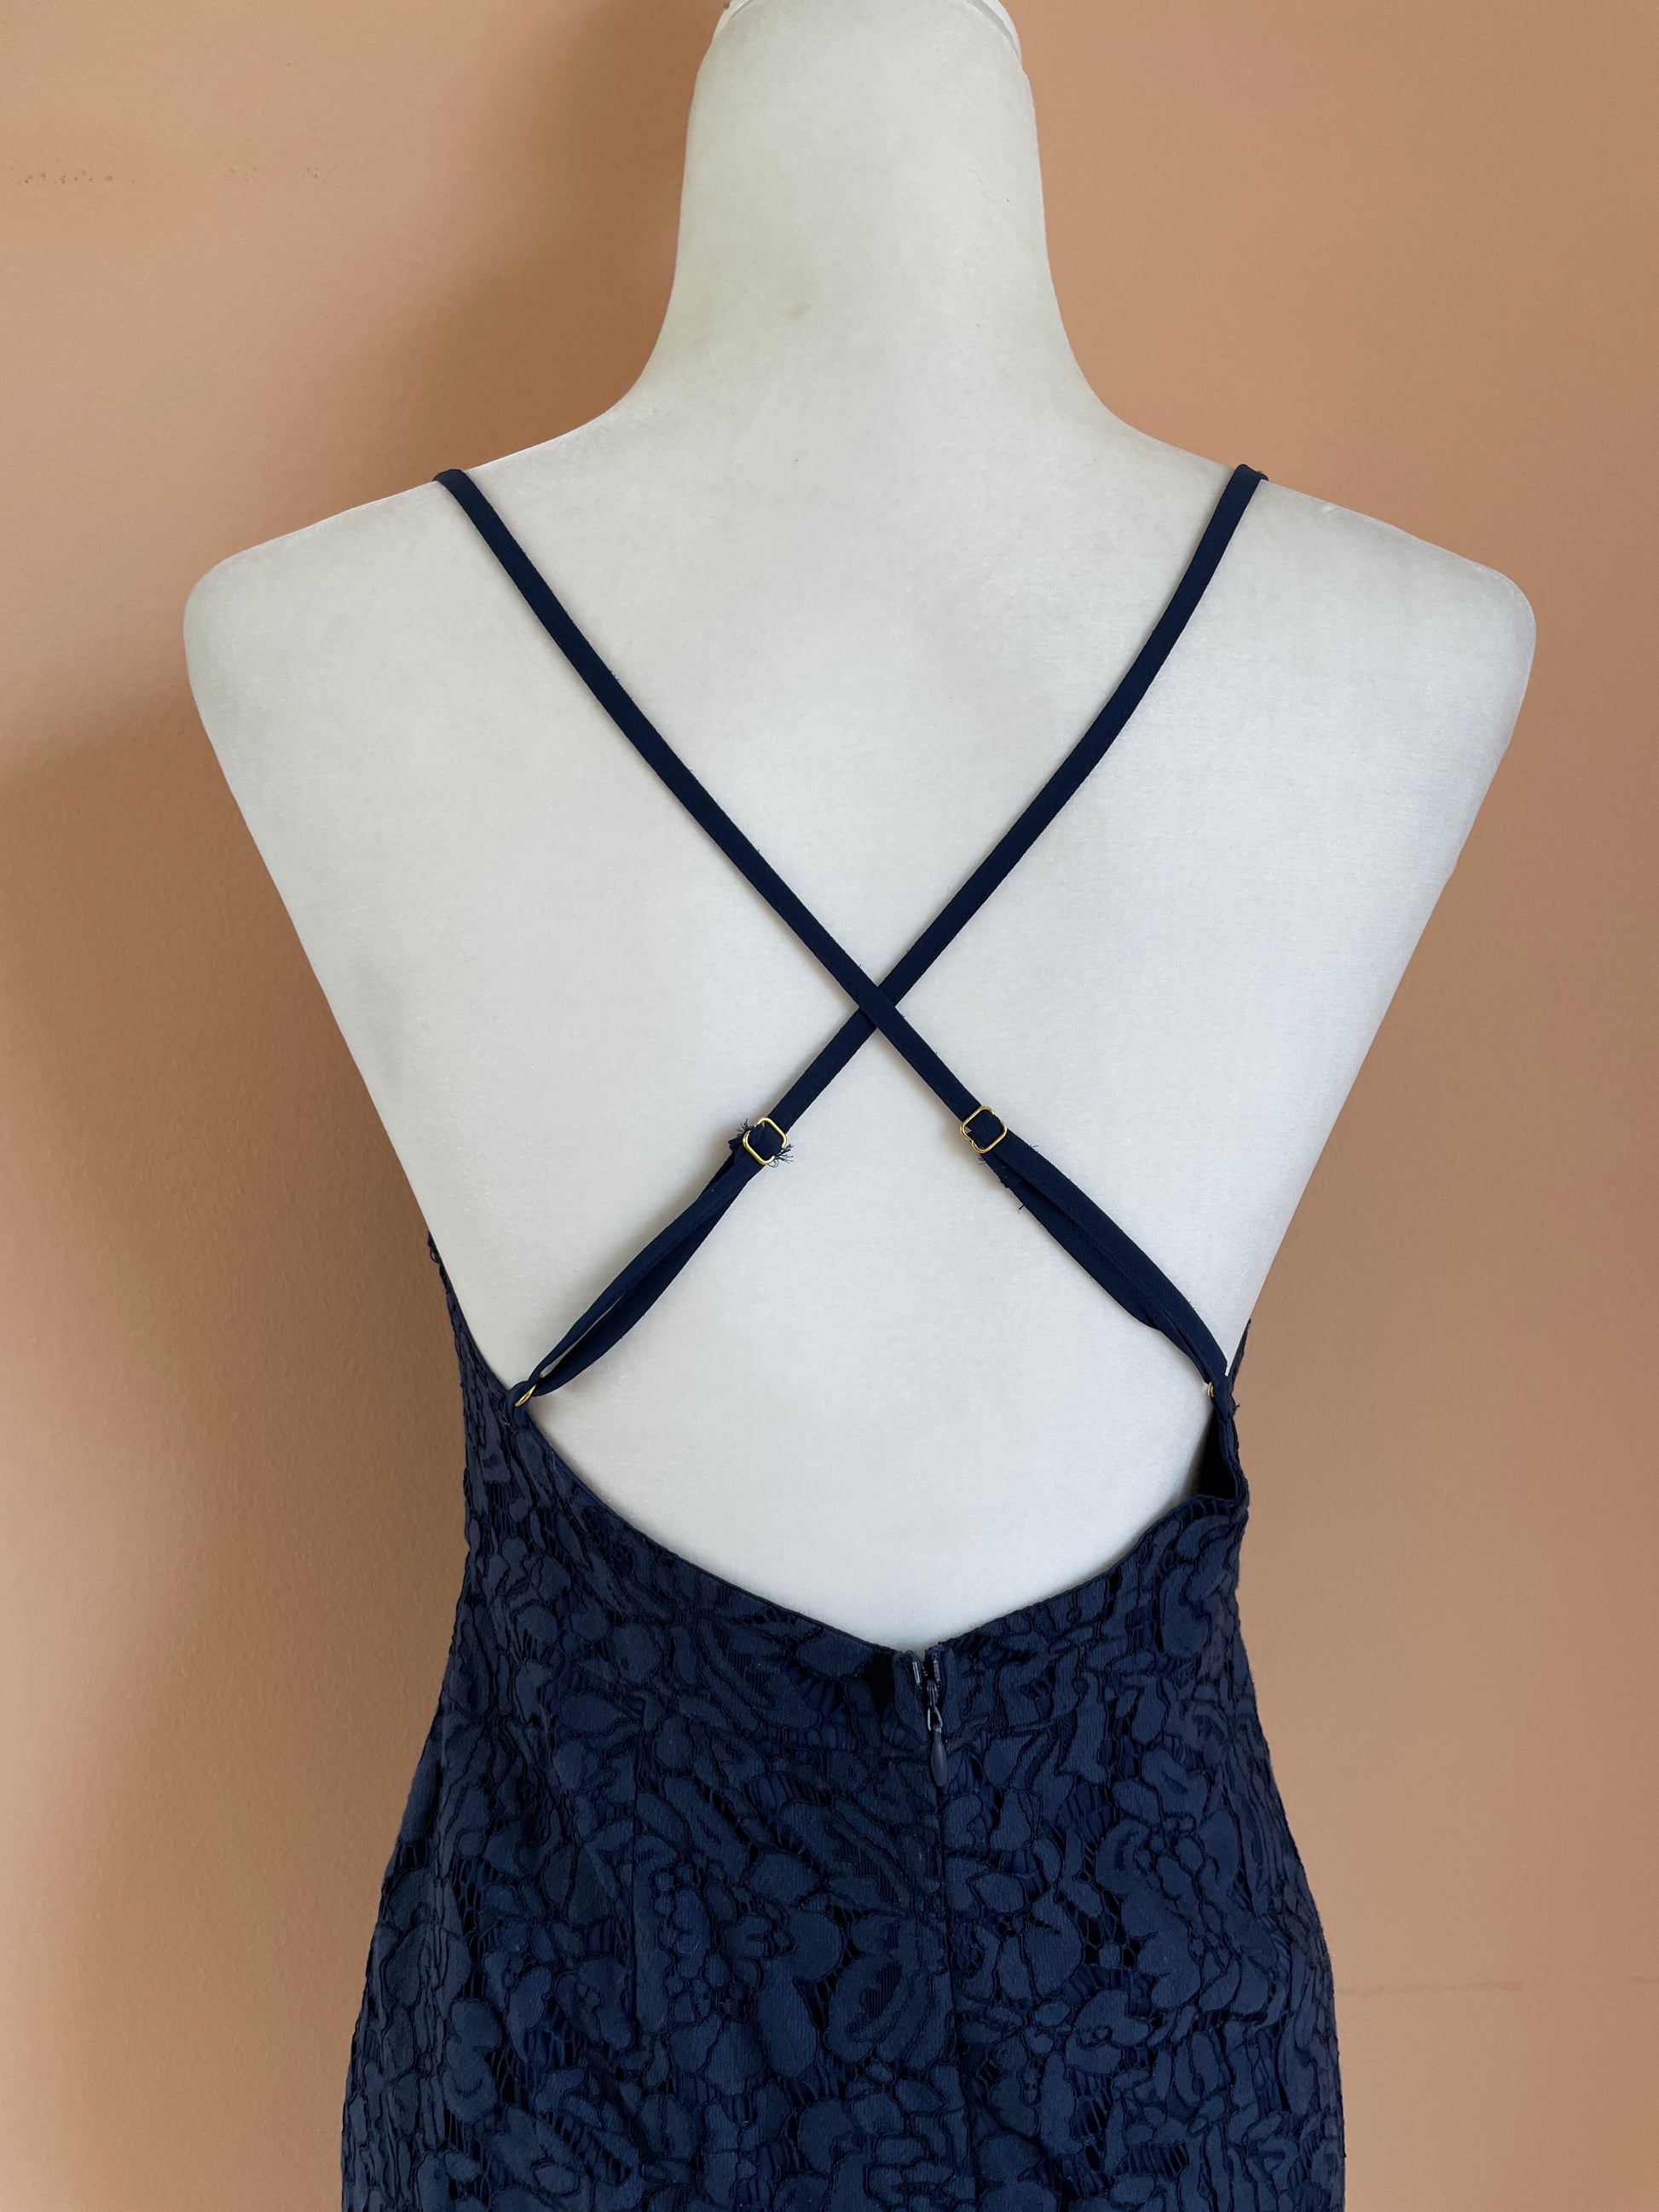  2000s Lacy Blue Bodycon Open Back Evening Dress.